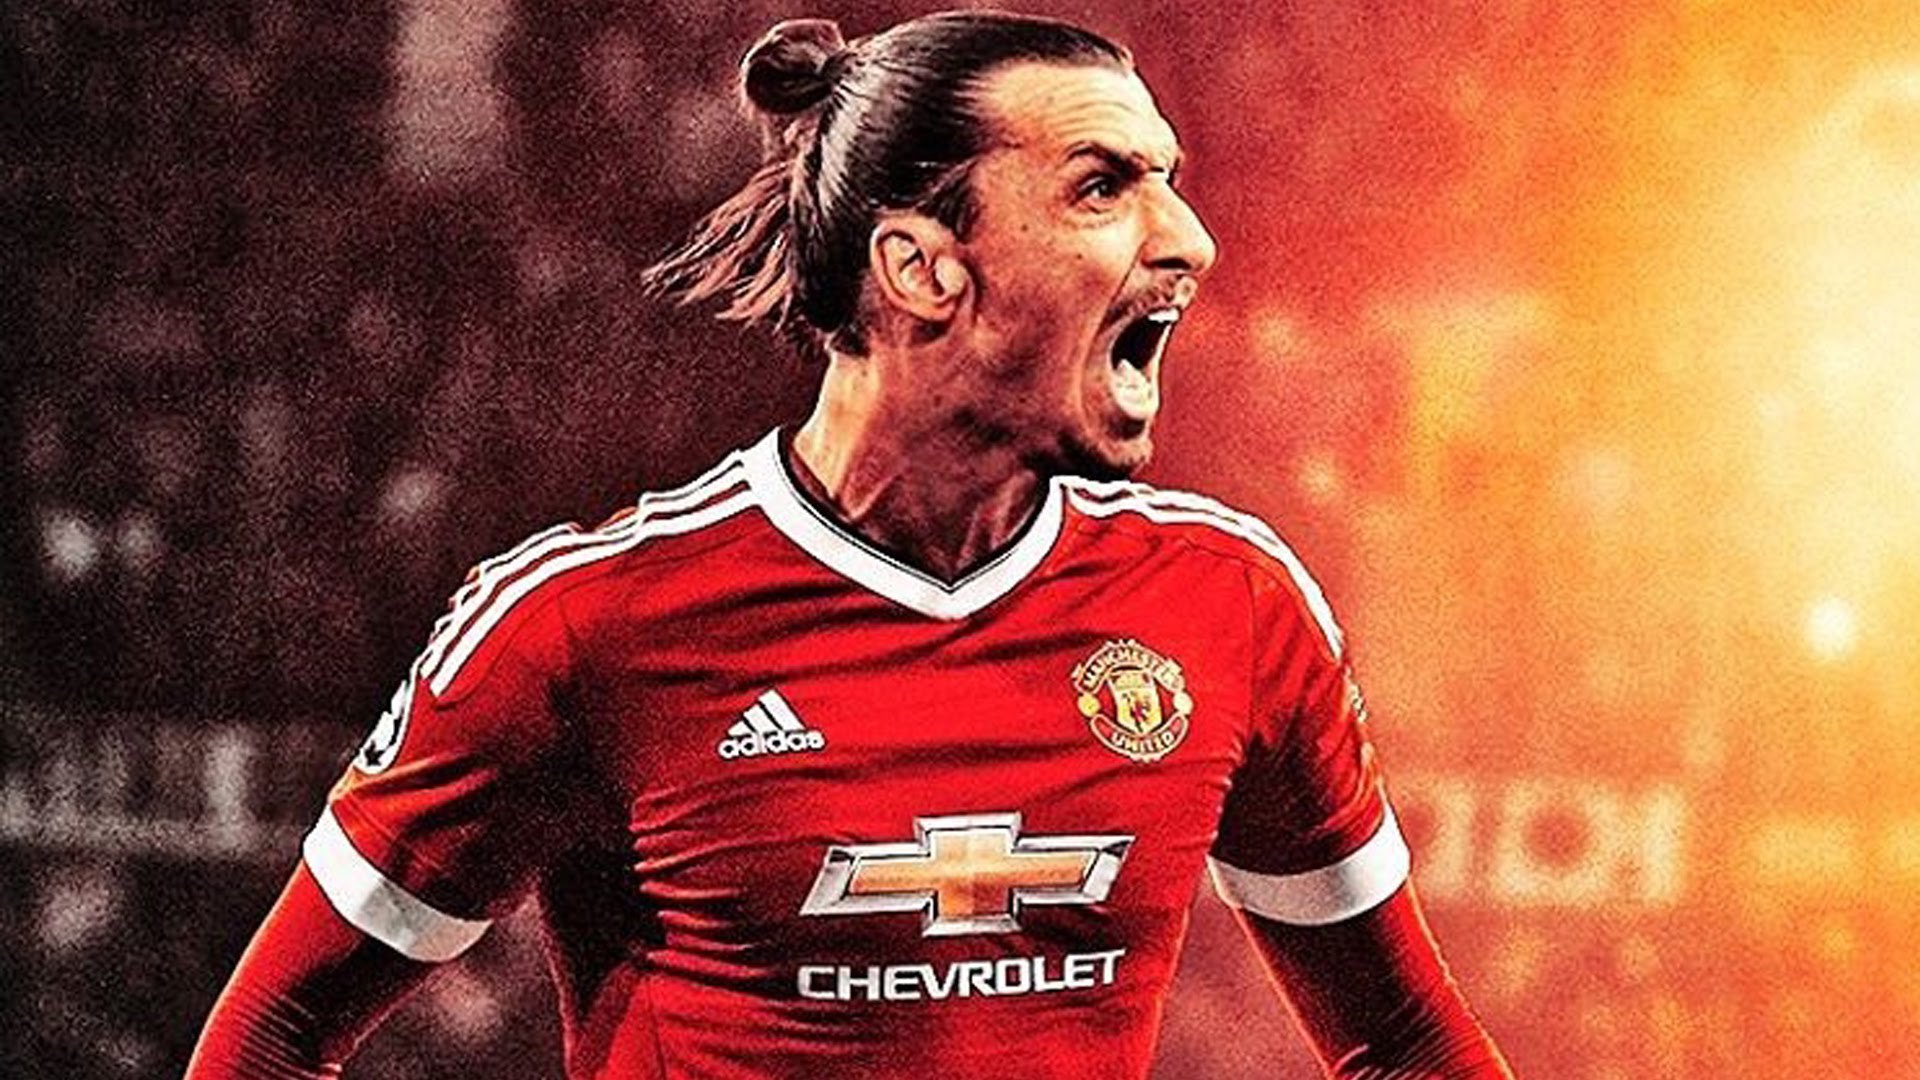 Zlatan Ibrahimovic Wallpapers Images Photos Pictures